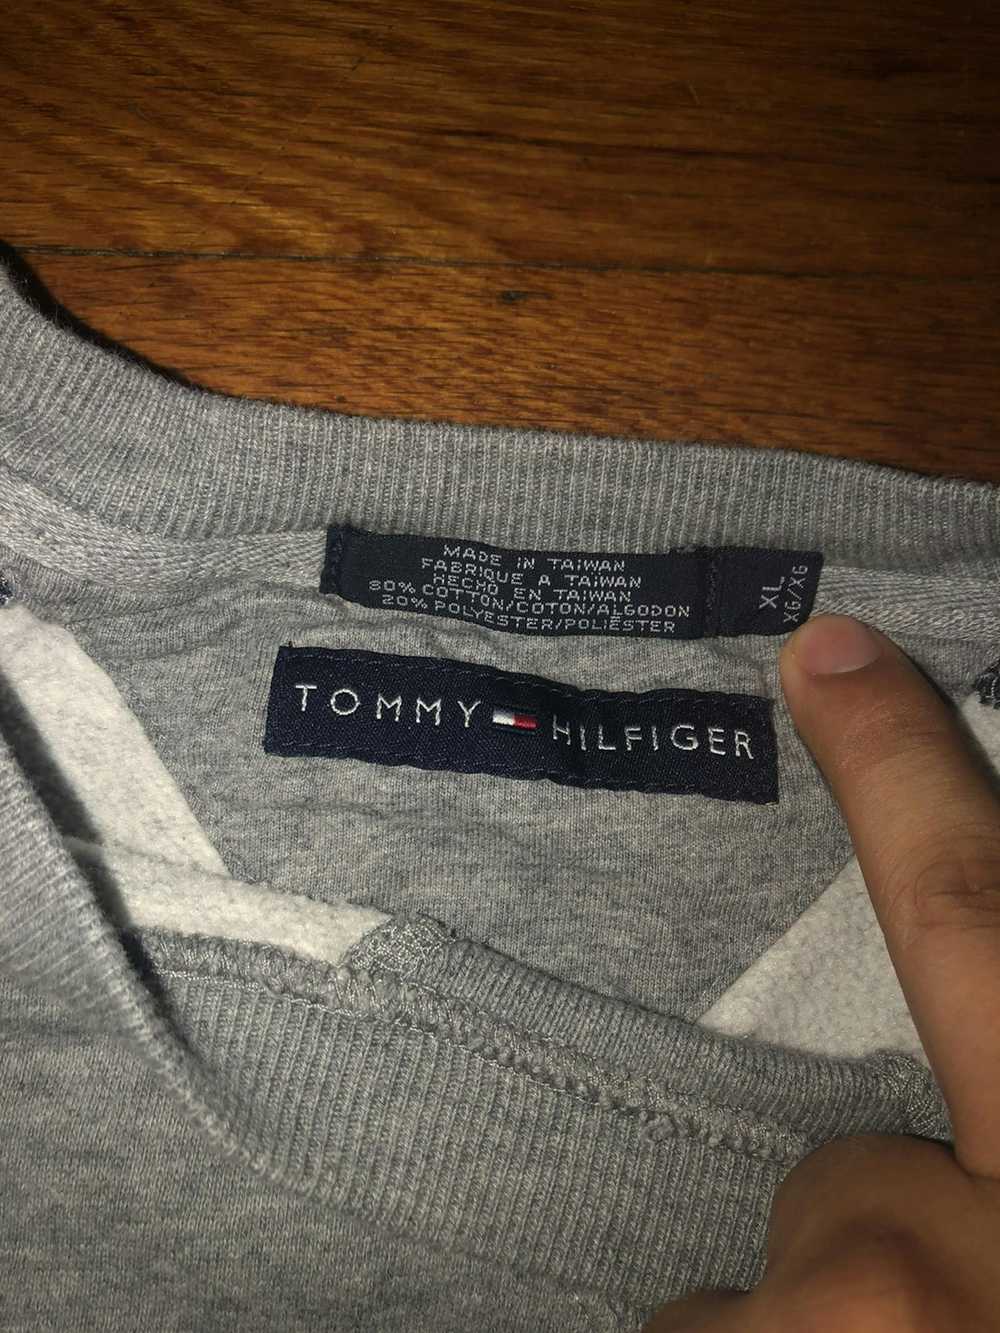 Tommy Hilfiger Tommy Hilfiger pull over sweater - image 2